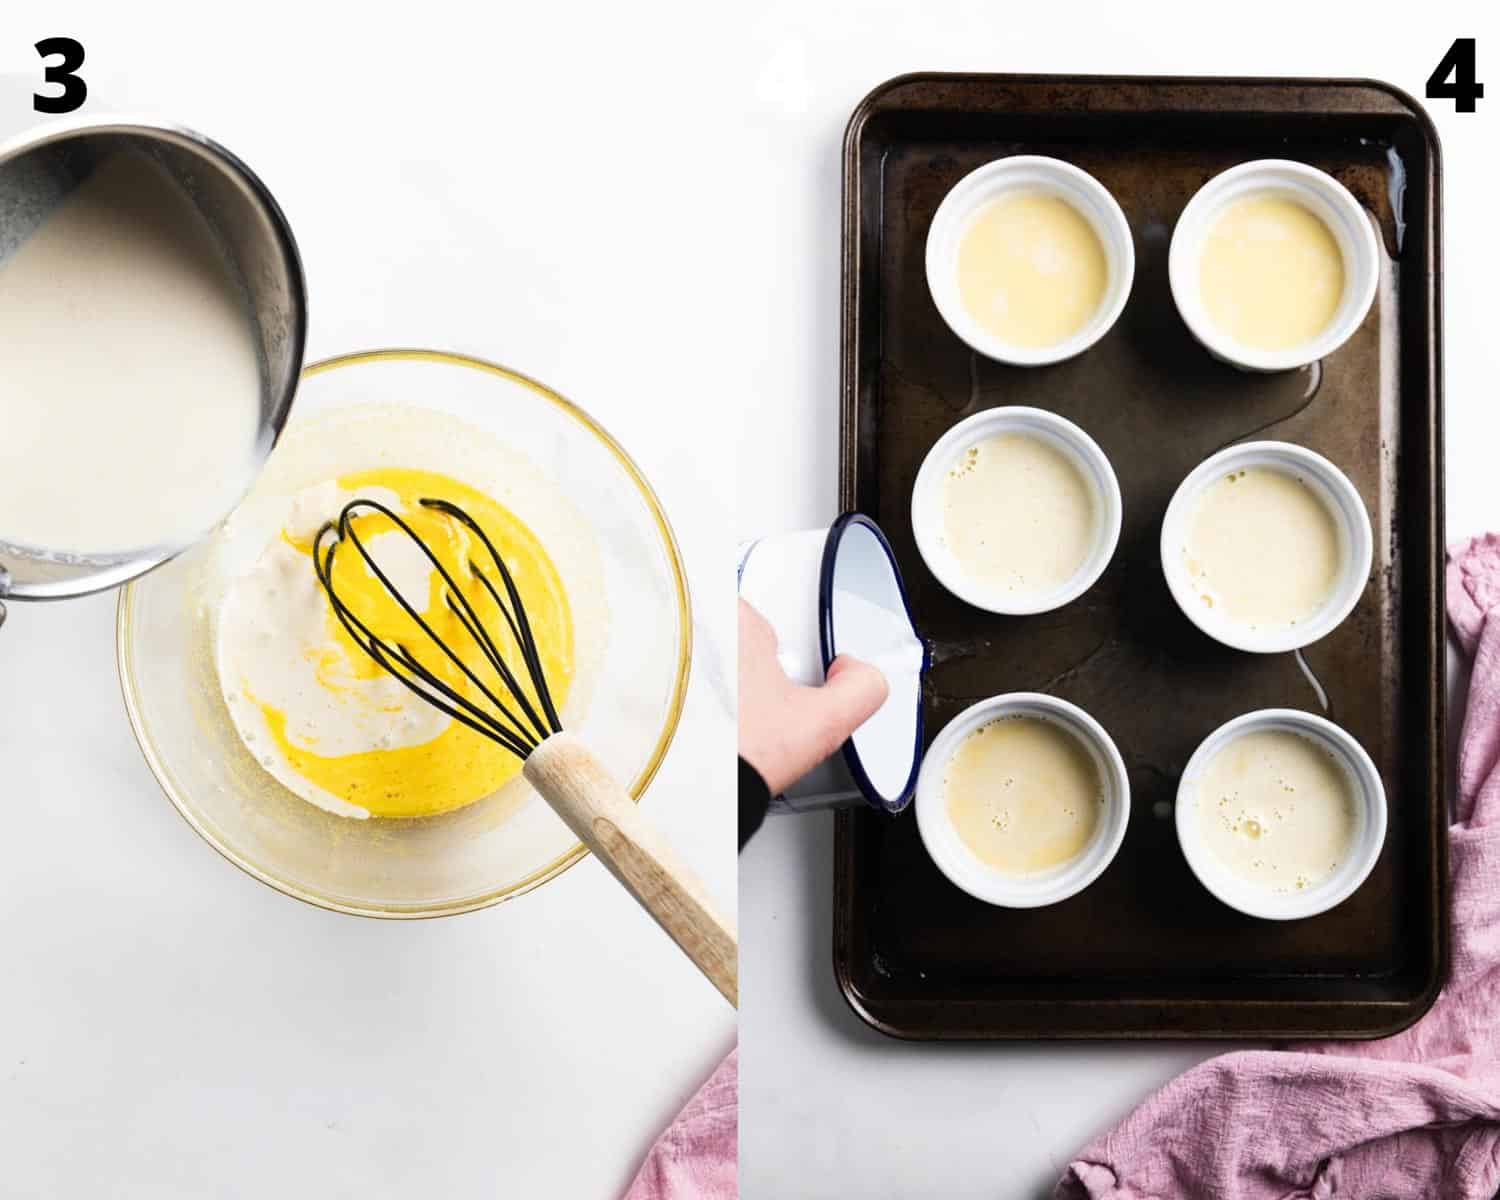 montage of a recipe steps: on the left a transparent bowl with a yellow mixture and milk being poured and on the right a baking sheet with white ramekins filled with a yellow mixture.